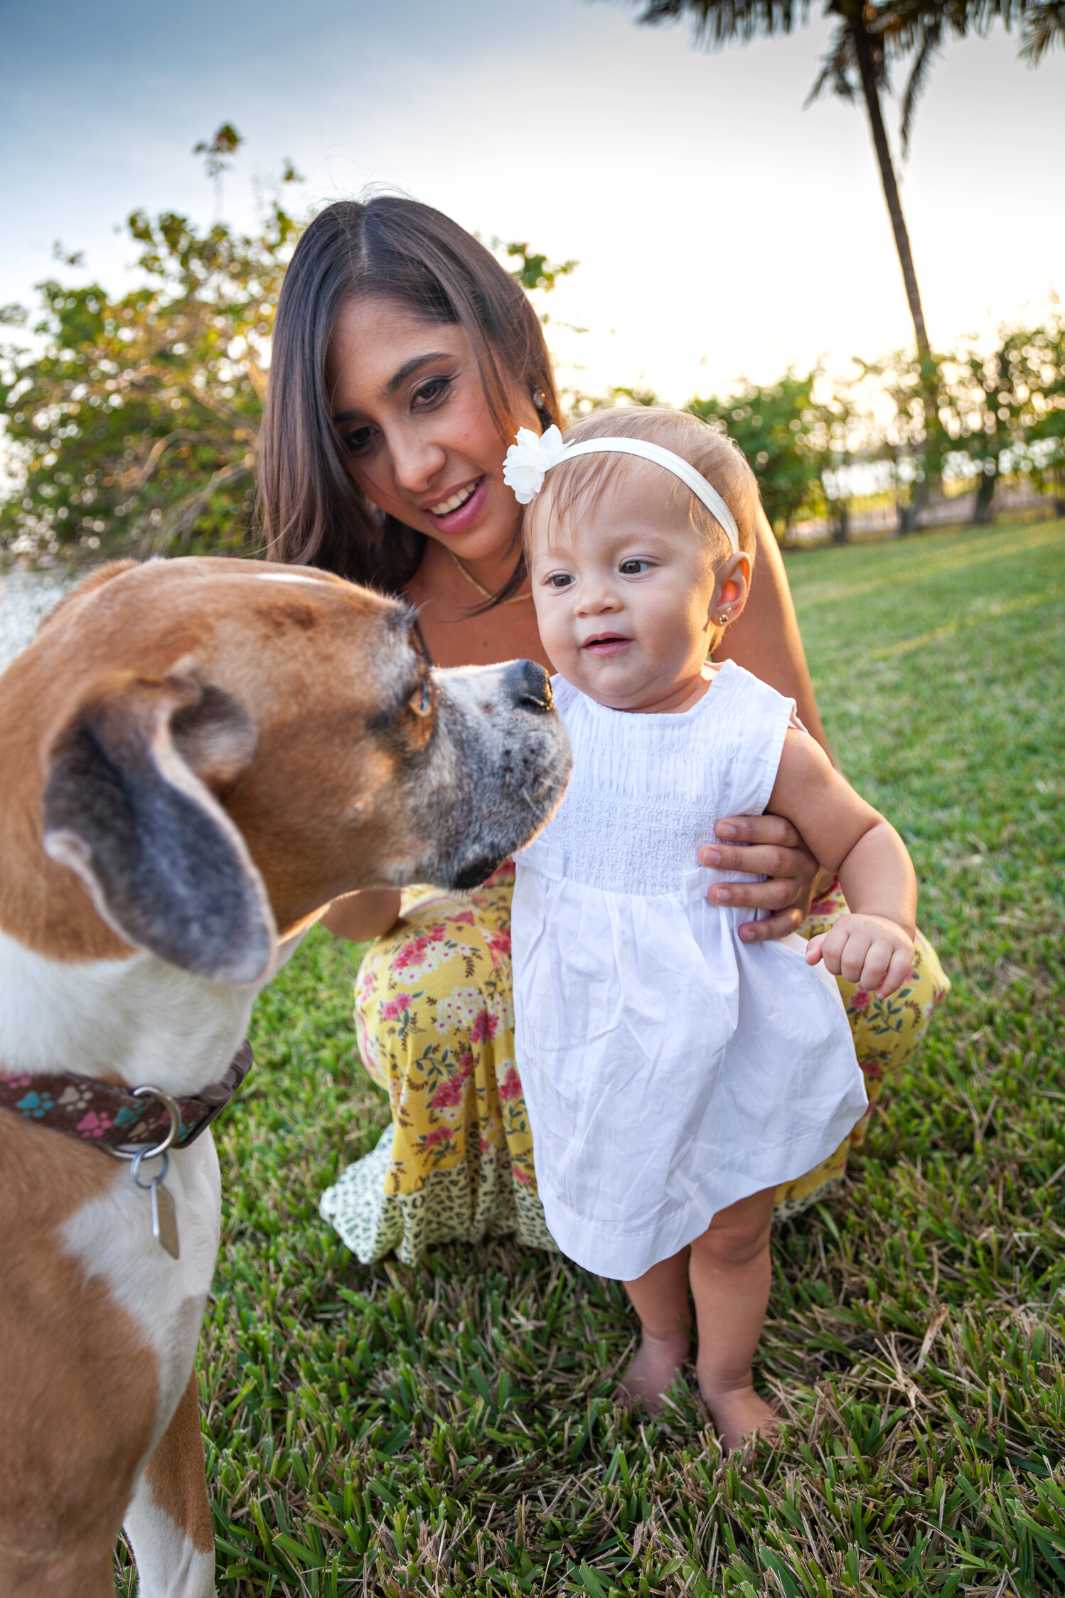 Young woman with her baby girl, connecting with their dog in the park, bonding.